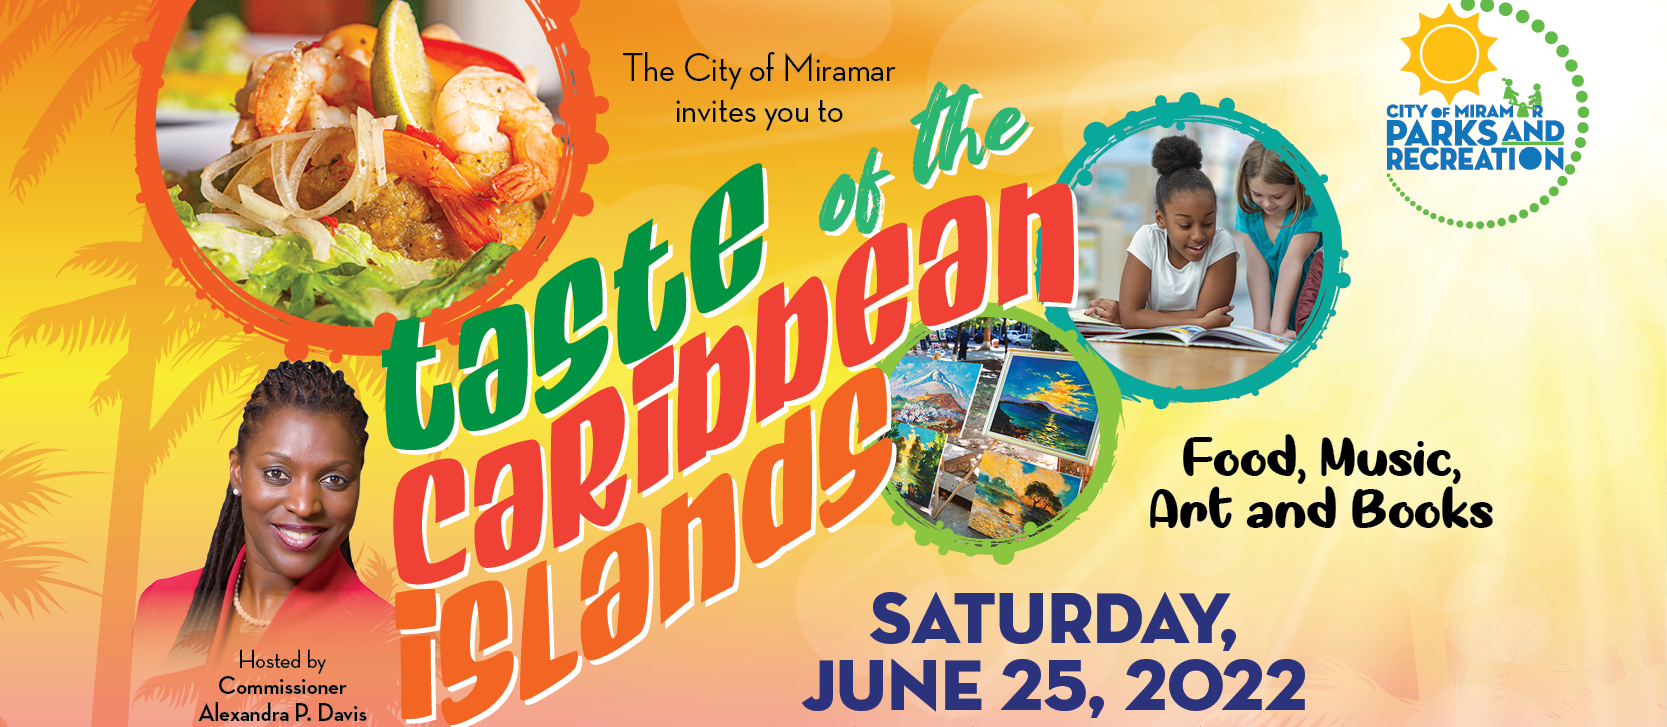 TASTE OF THE CARIBBEAN ISLANDS RETURNS TO MIRAMAR IN A NEW LOCATION AT VIZCAYA PARK